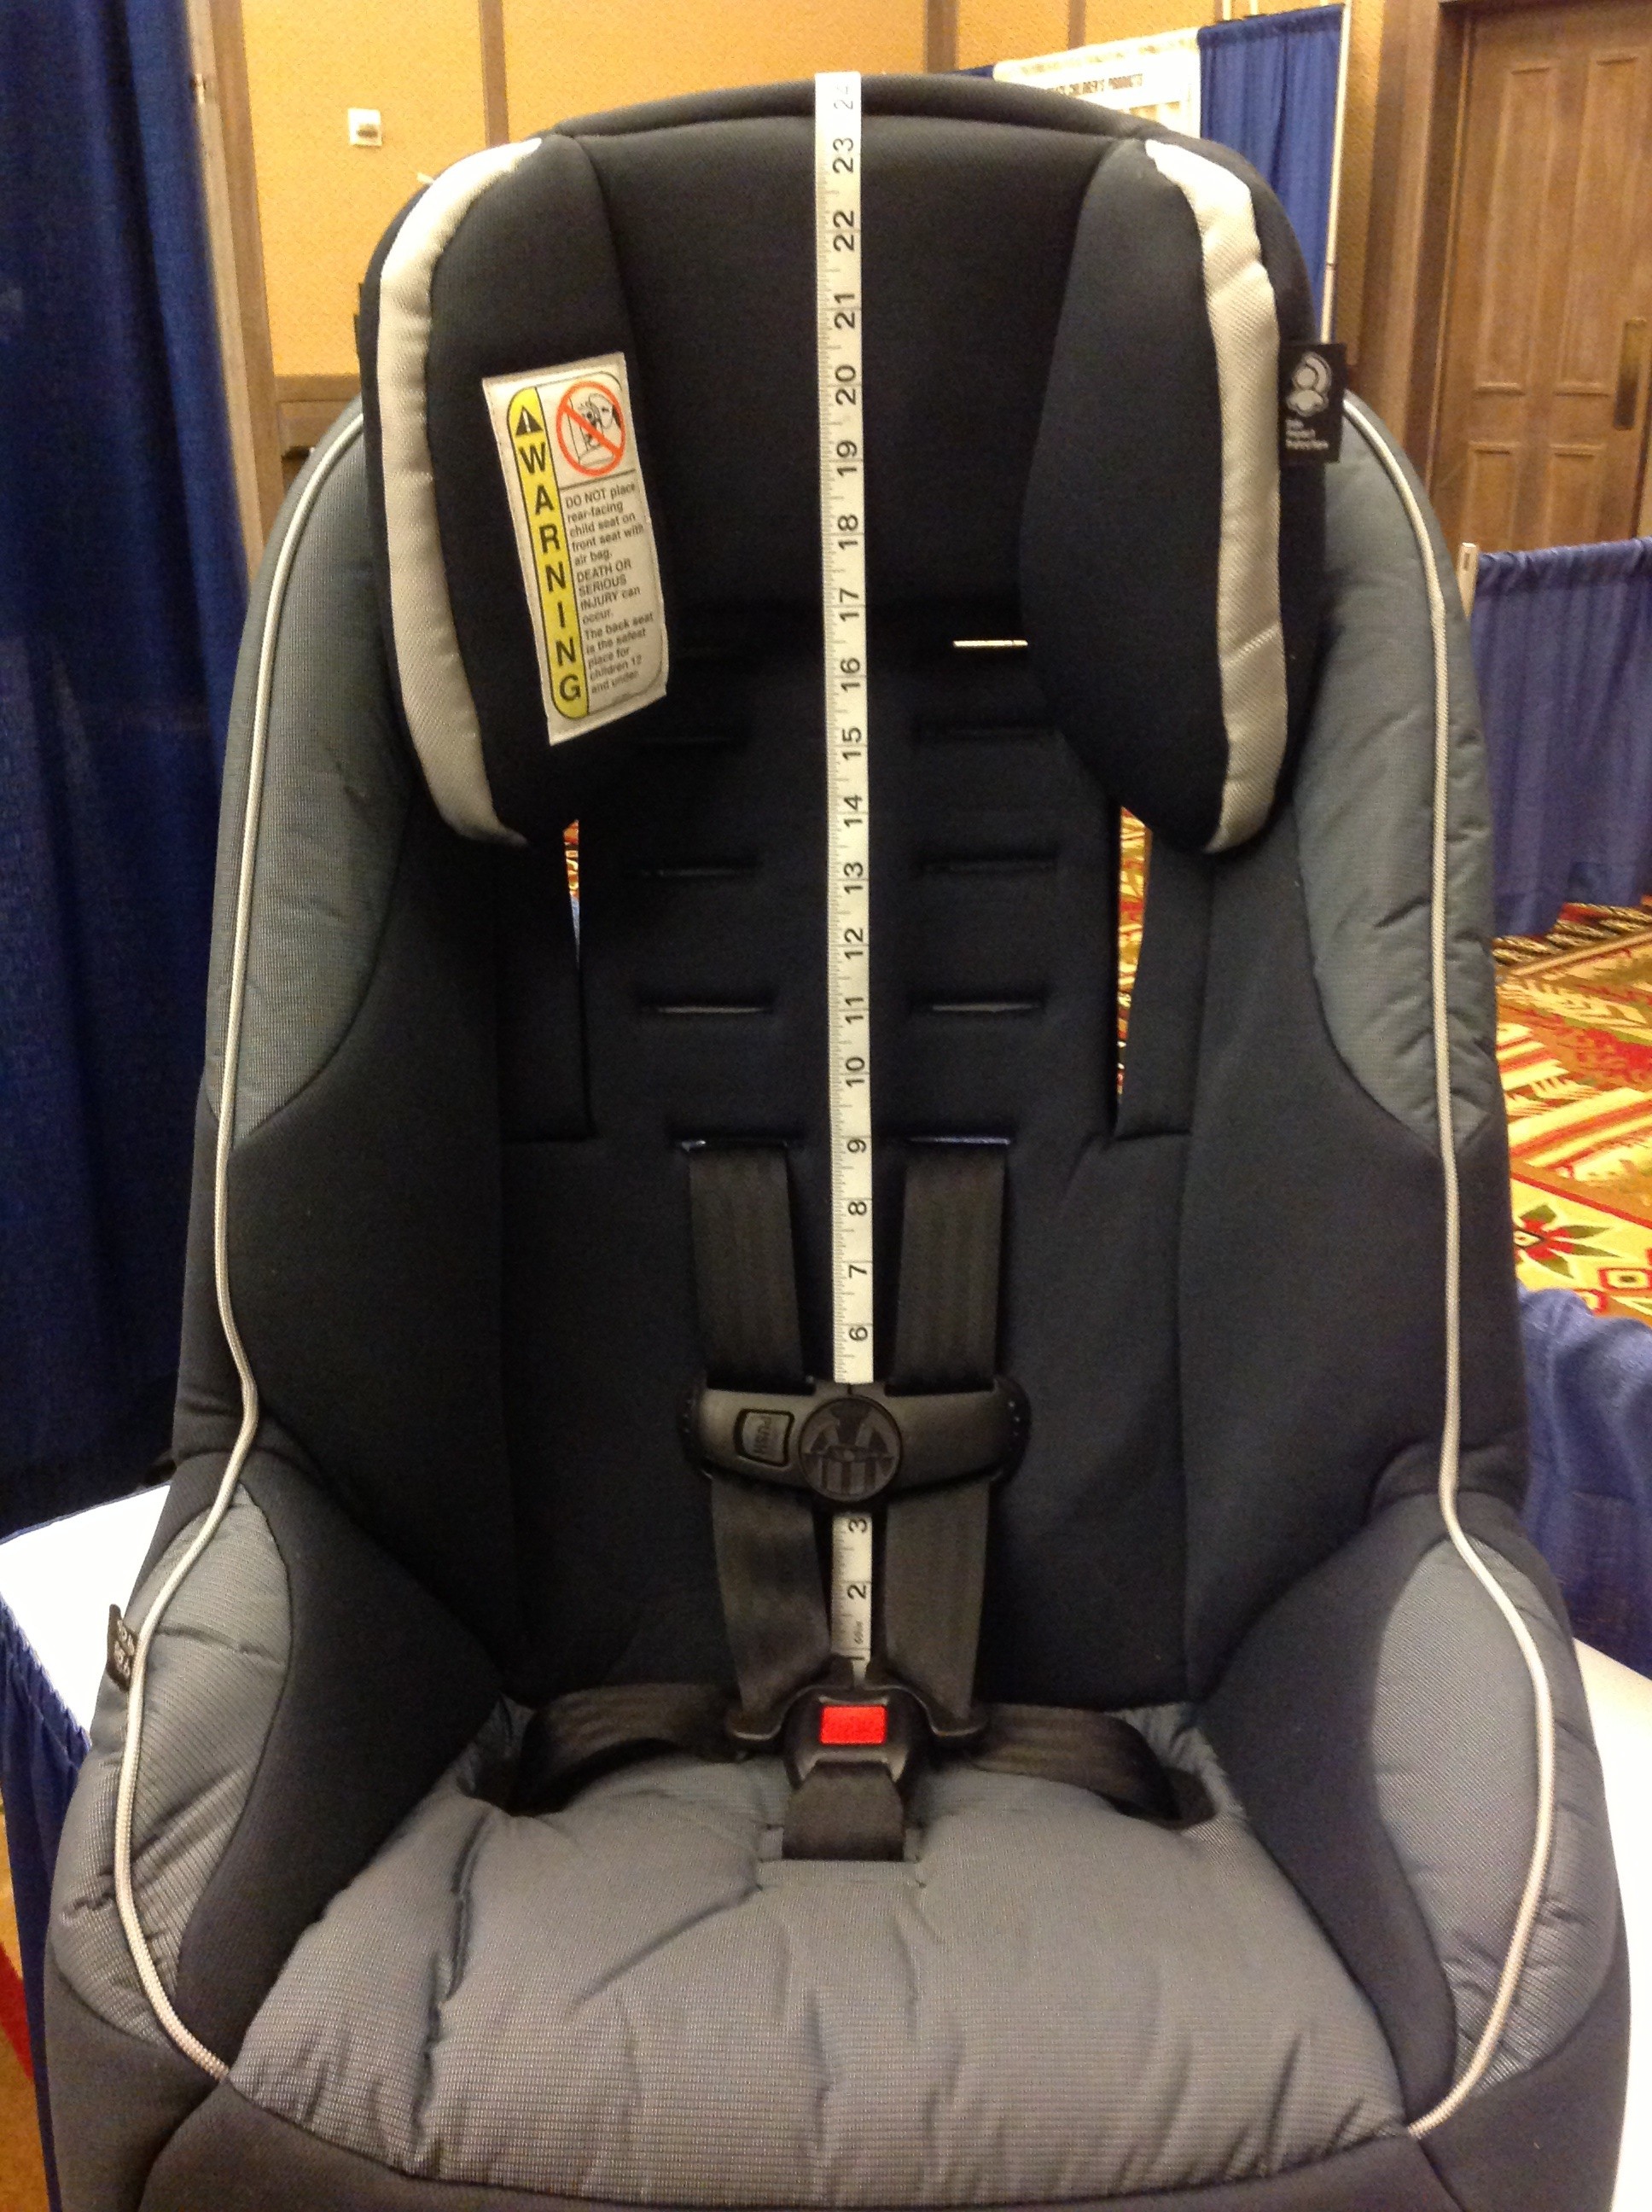 Rear Facing Convertible Seats, What Is The Weight Limit For Convertible Car Seat